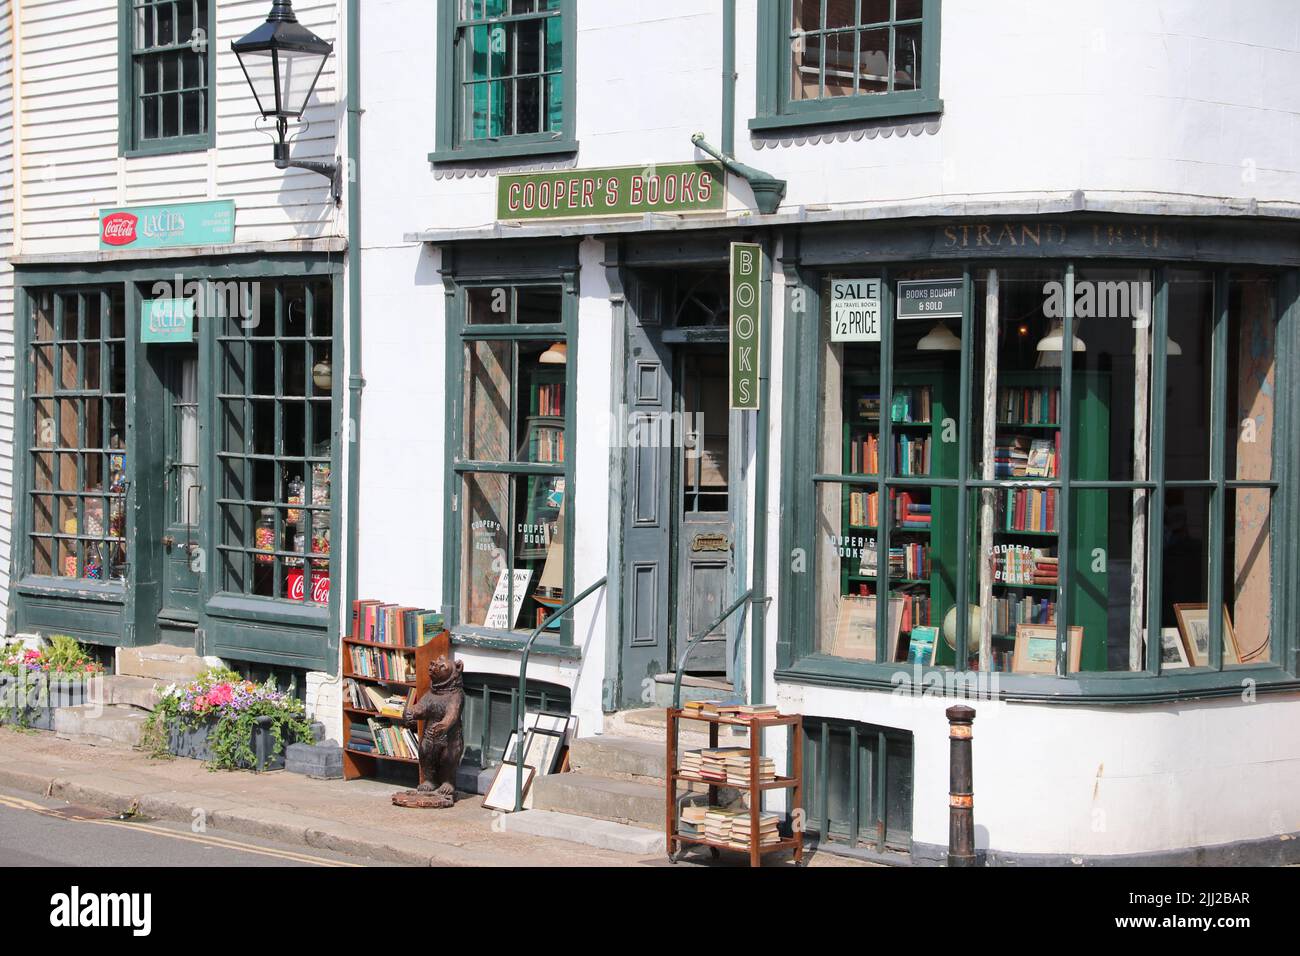 STRAND HOUSE IN RYE IN THE UK THAT WAS USED AS COOPER'S BOOKS AND LACIE'S IN THE NETFLIX TV SHOW RED BOOK STARRING AARON PAUL Stock Photo